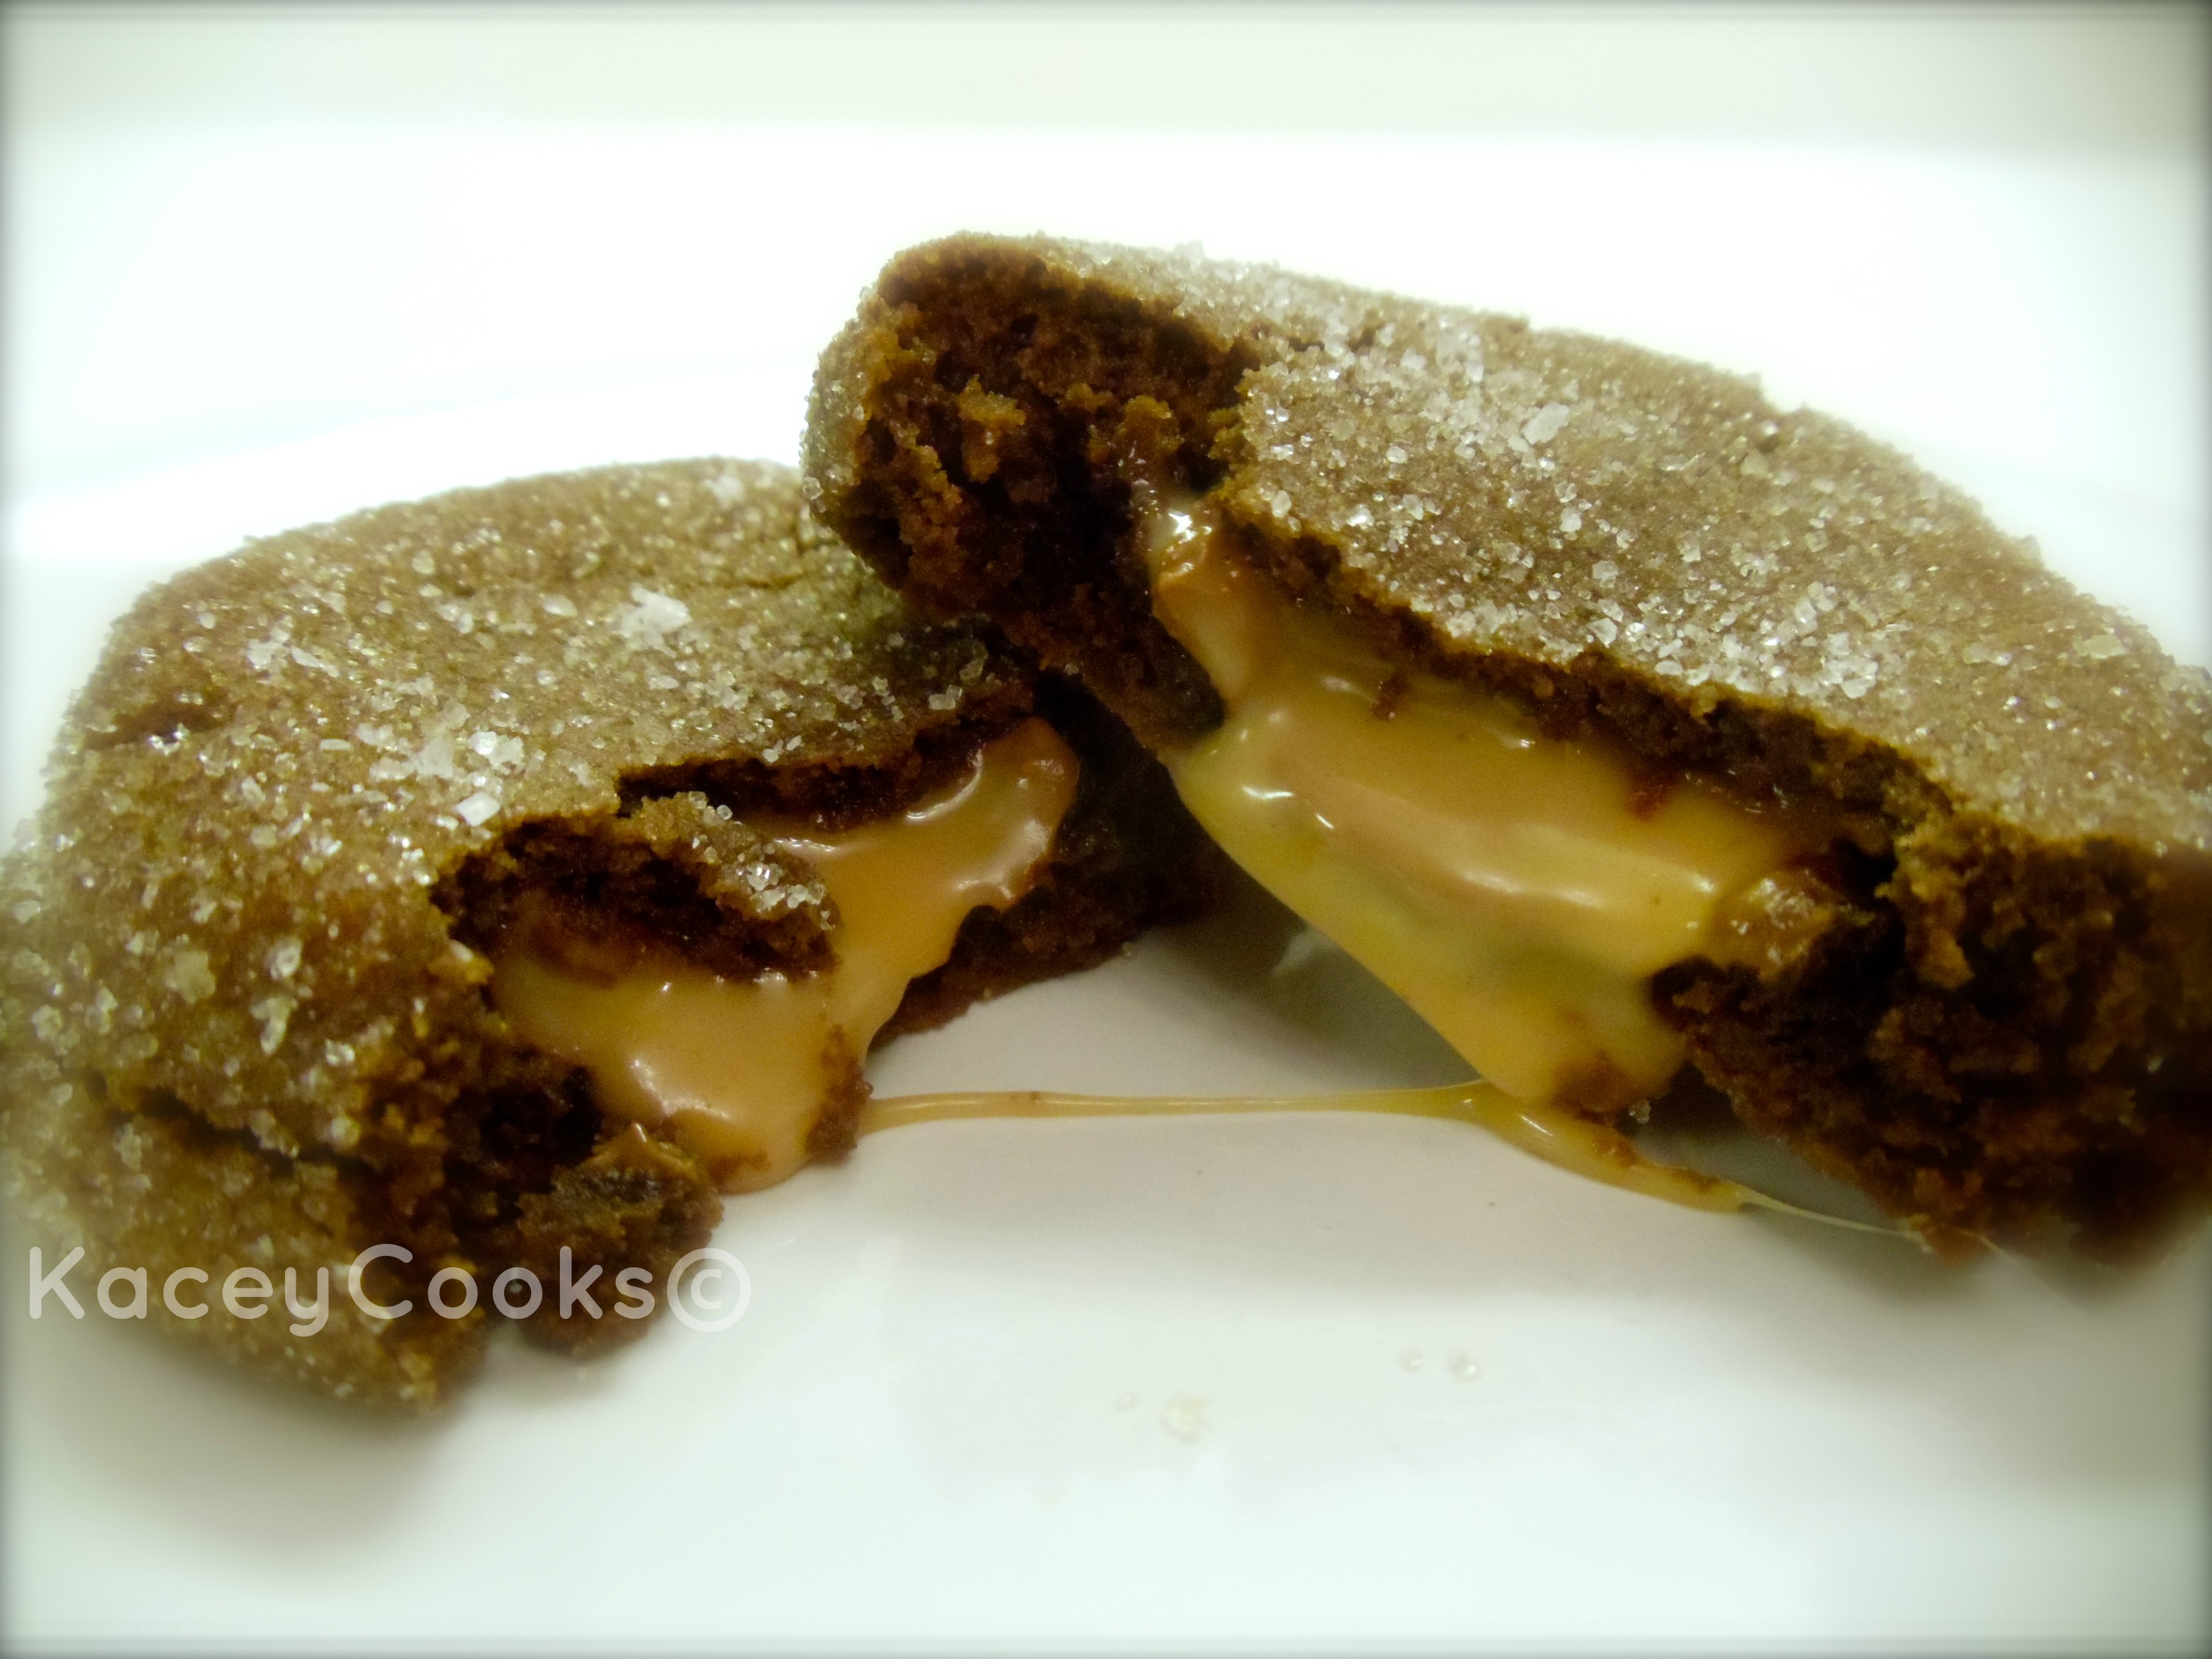 Seriously! A sugared chocolate cookie with oozie caramel in the center and a pinch of sea salt on the very top of the cookie- Ya'll *this* is gonna blow your mind! #Real Food Girl: Unmodified